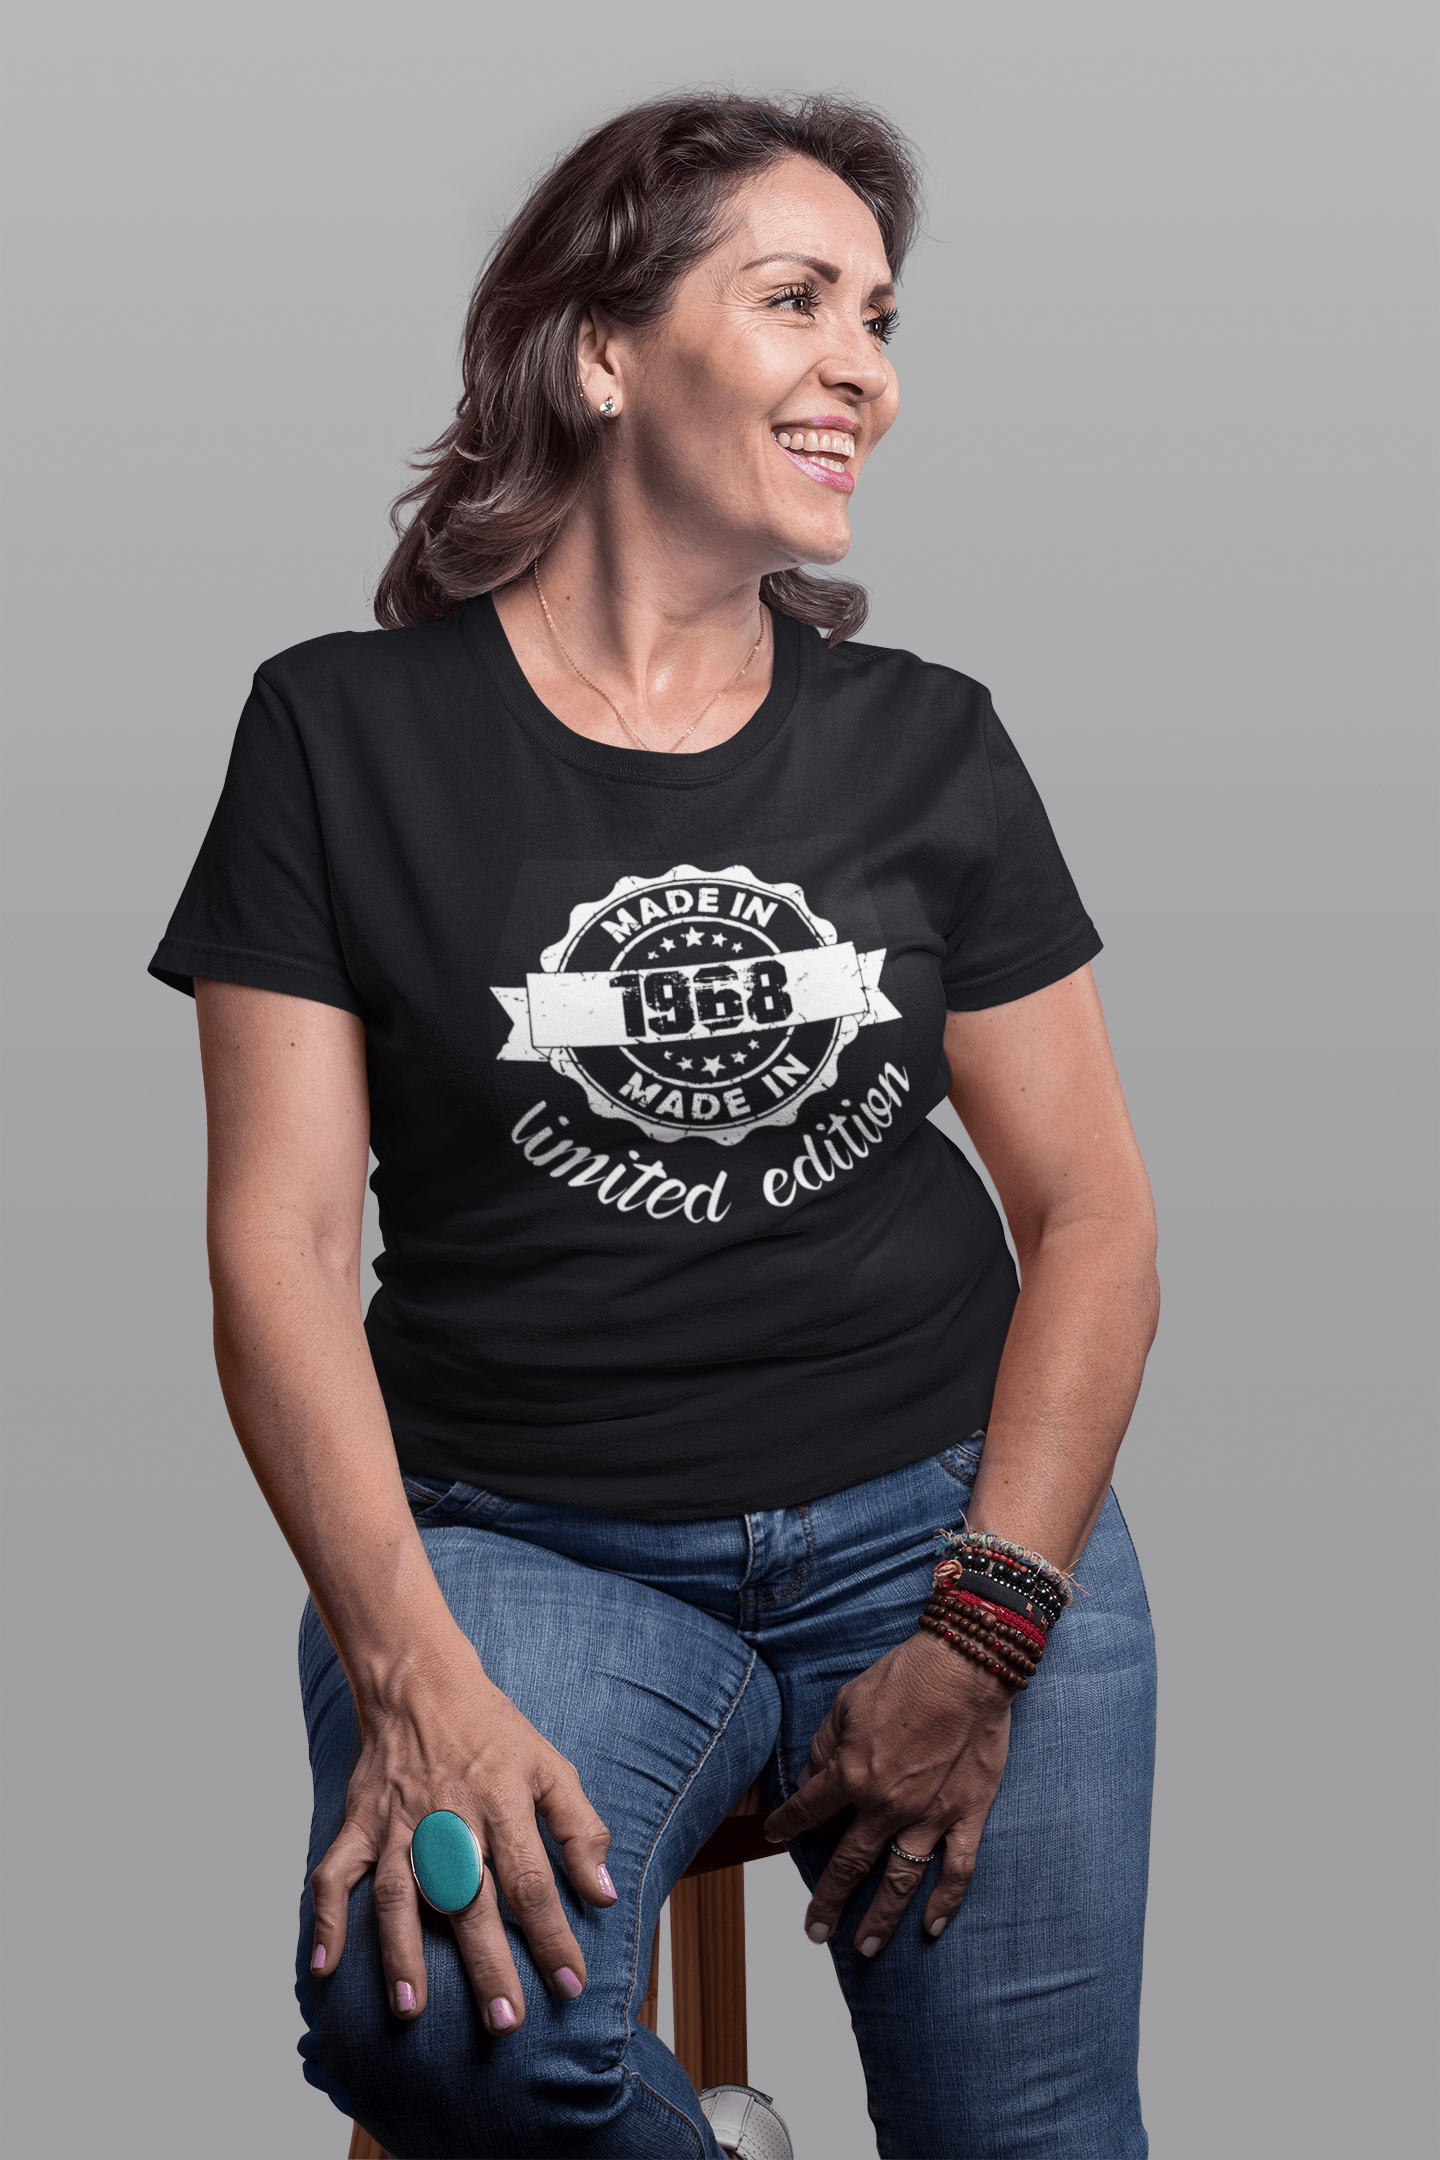 Made in 1968 Limited Edition Women's T-shirt Black Birthday Gift 00426